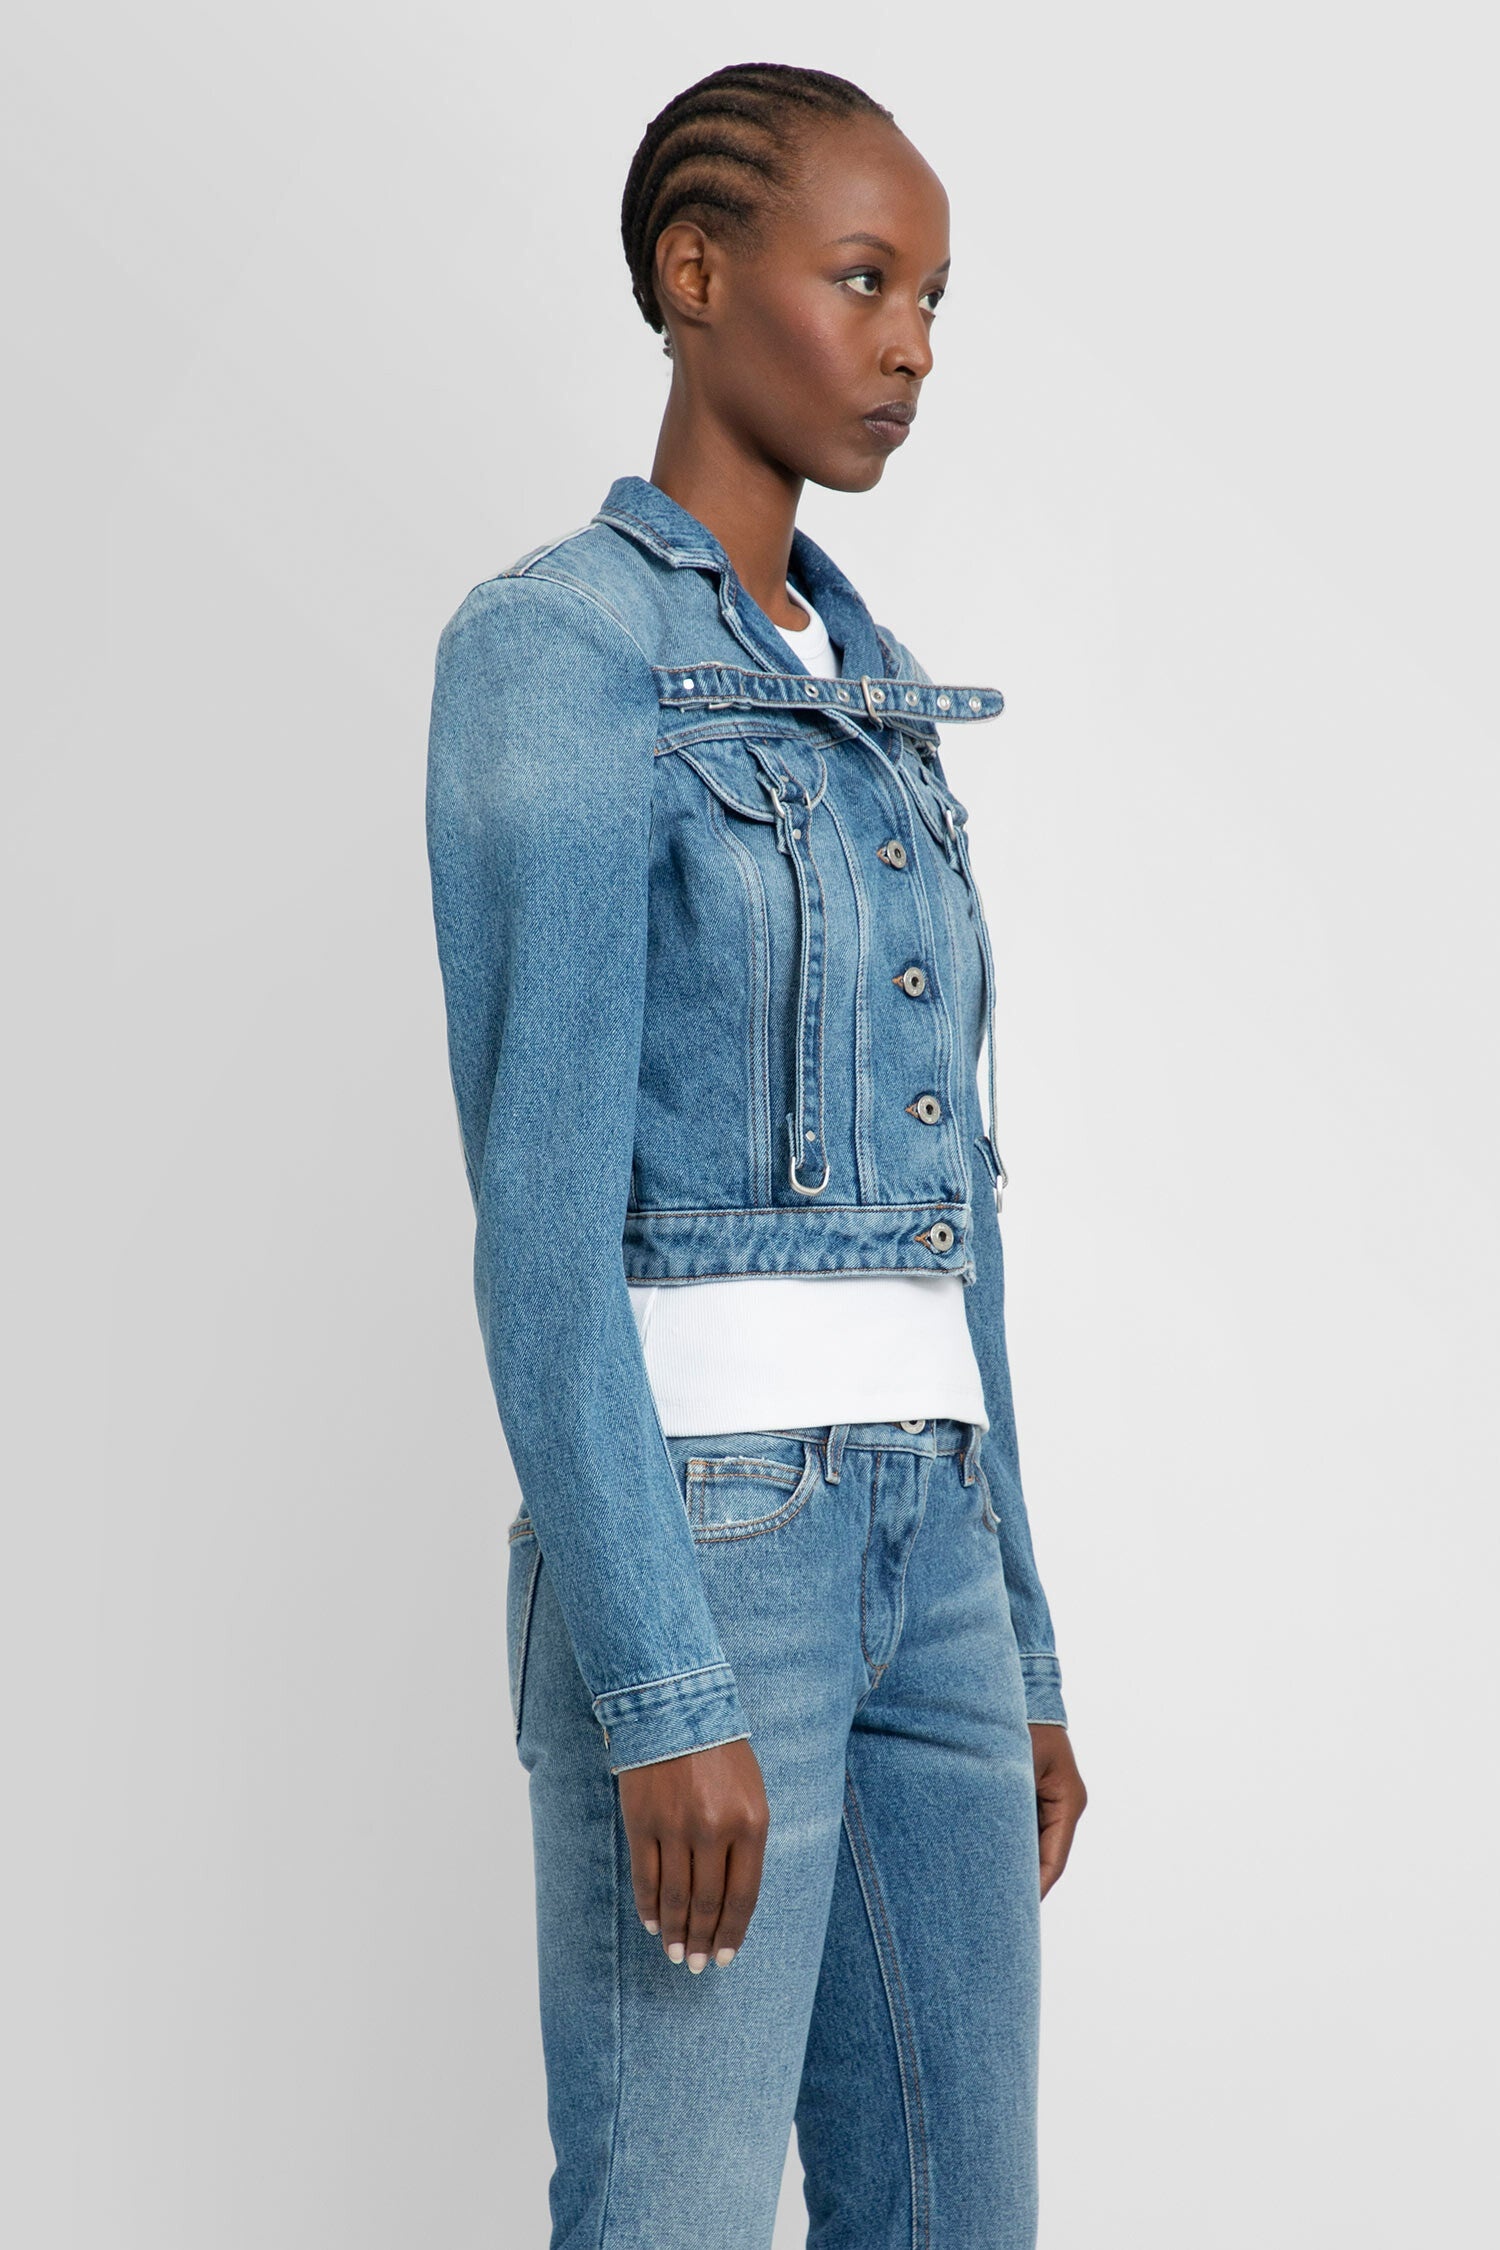 OFF-WHITE WOMAN BLUE JACKETS - 3